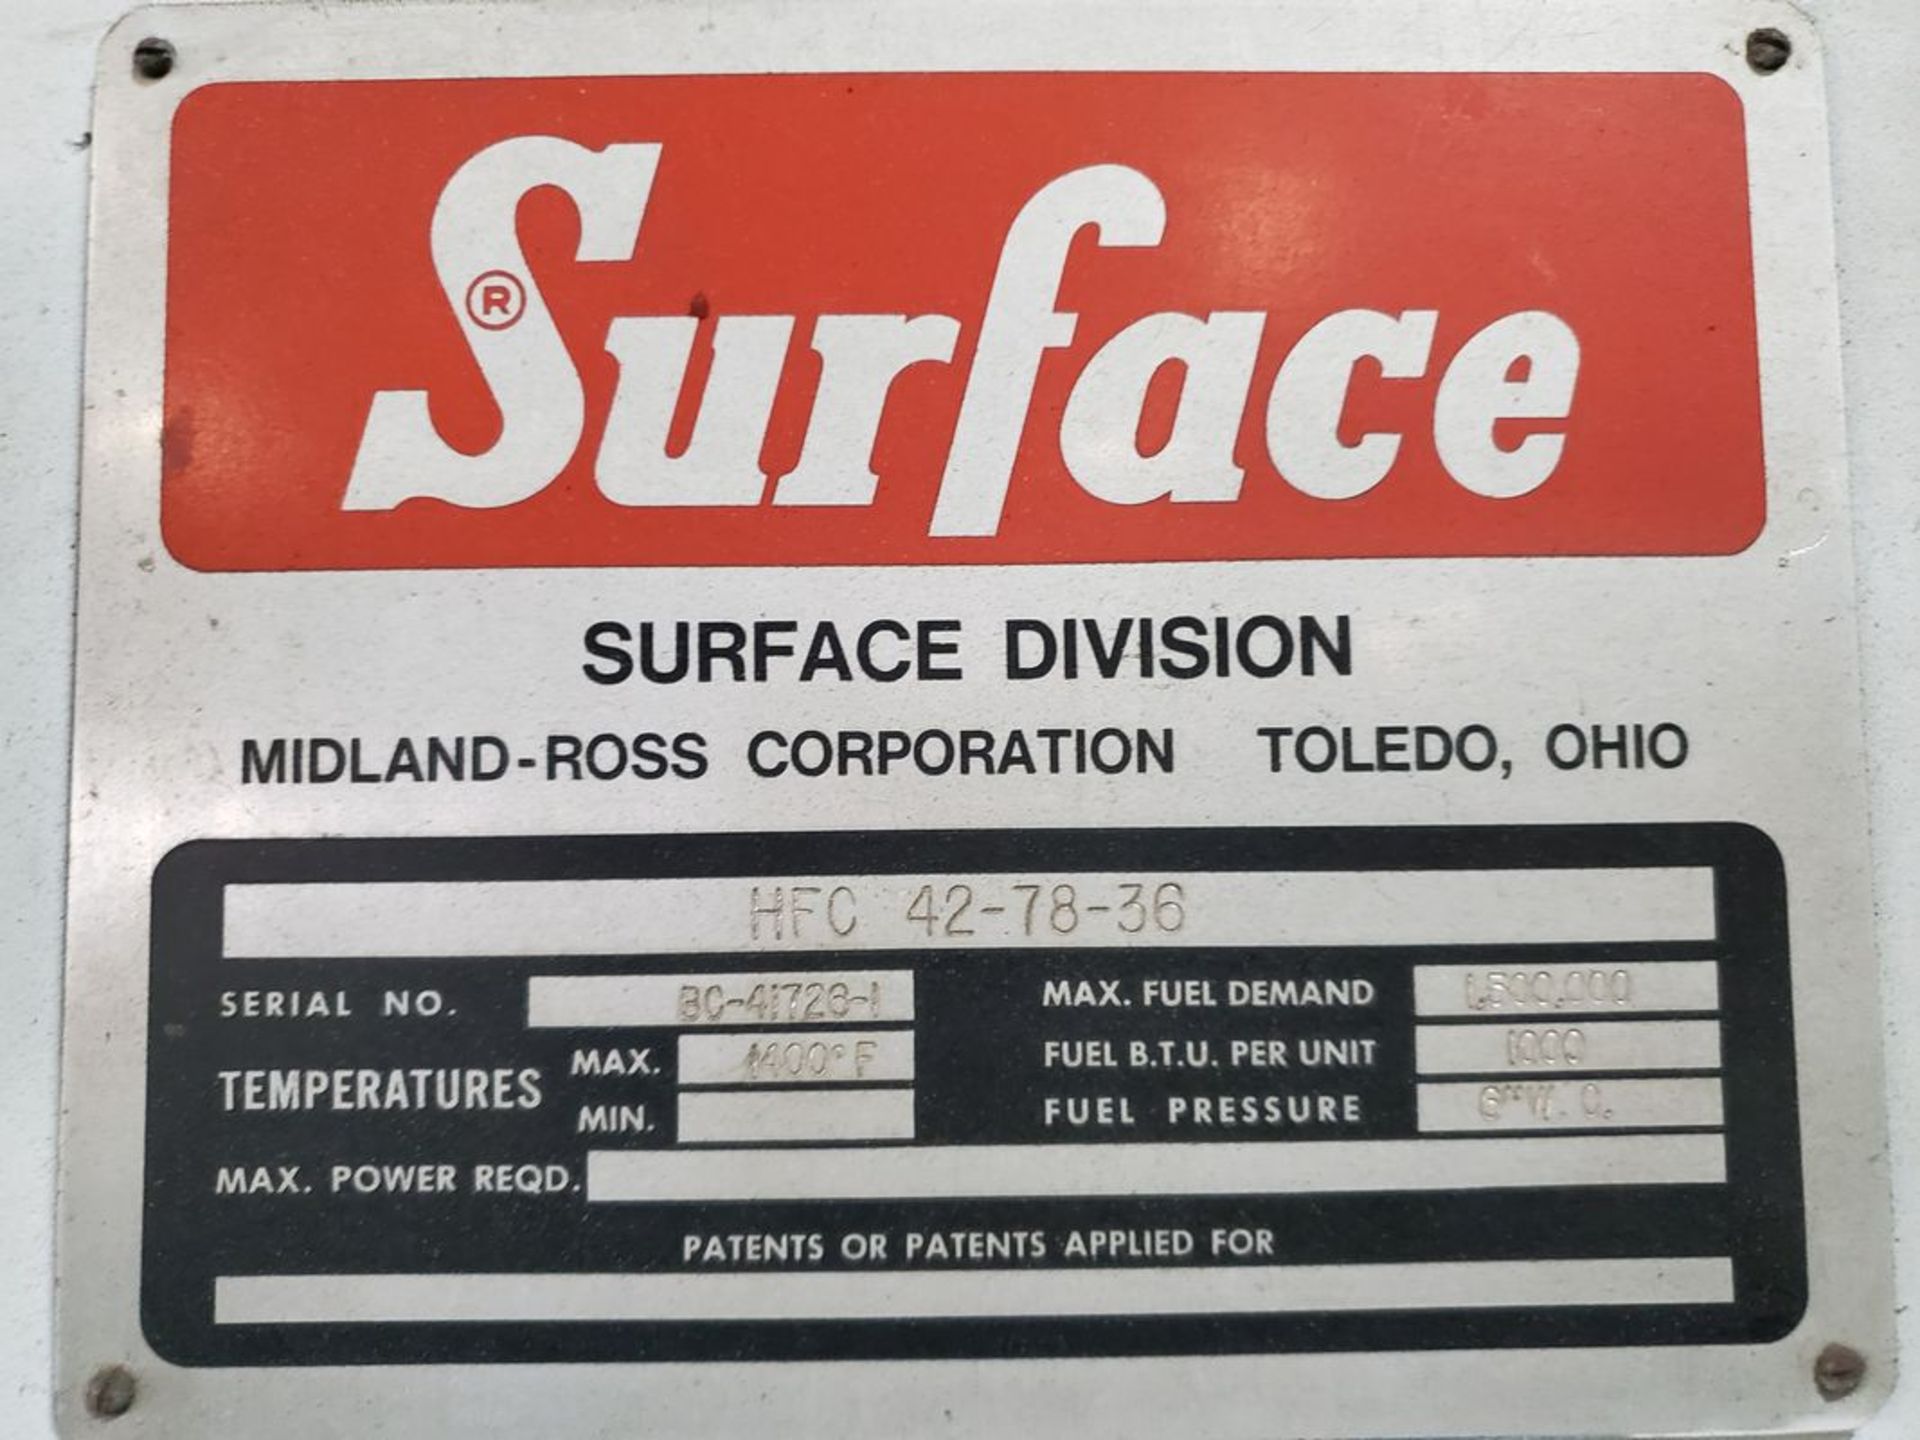 Allcase/Surface HFC 42-78-36 Combustion Draw Furnace - Image 6 of 6